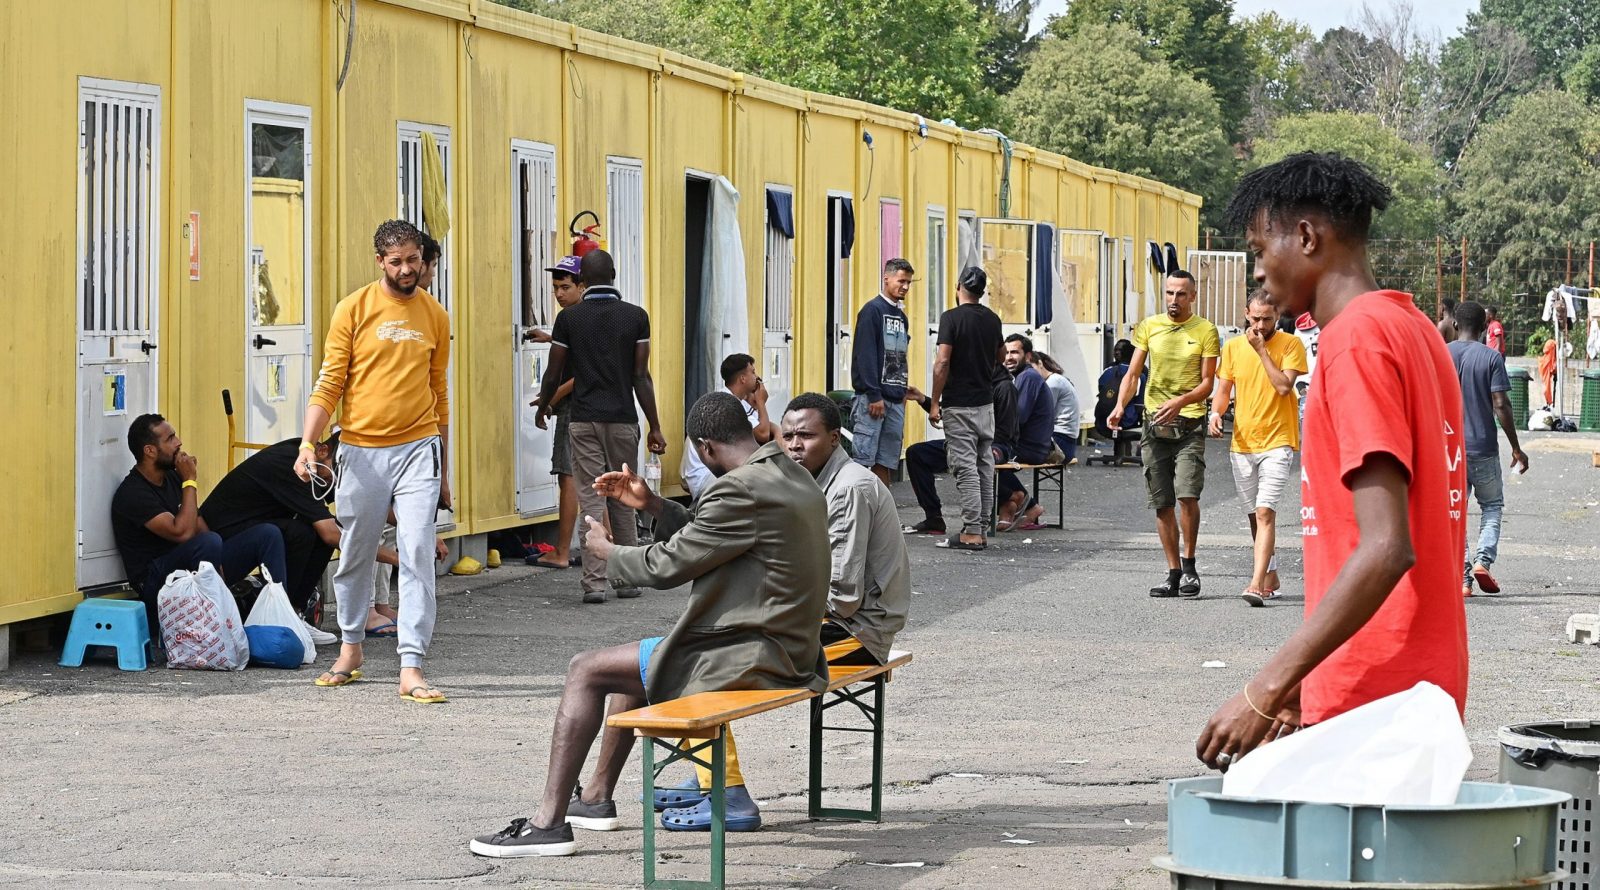 epa10871641 Migrants gather outside containers at the Red Cross reception centre in Via Tres, Turin, Italy, 20 September 2023. The center houses some 500 people in a compound and facilities which are meant for between 140 and 180 people in need. Italy saw an influx of thousands of migrants in the past weeks. According to Italy's Interior Ministry, nearly 126,000 immigrants and refugees have entered the country as of 2023, more than twice as many as during the same time period in 2022.  EPA/ALESSANDRO DI MARCO